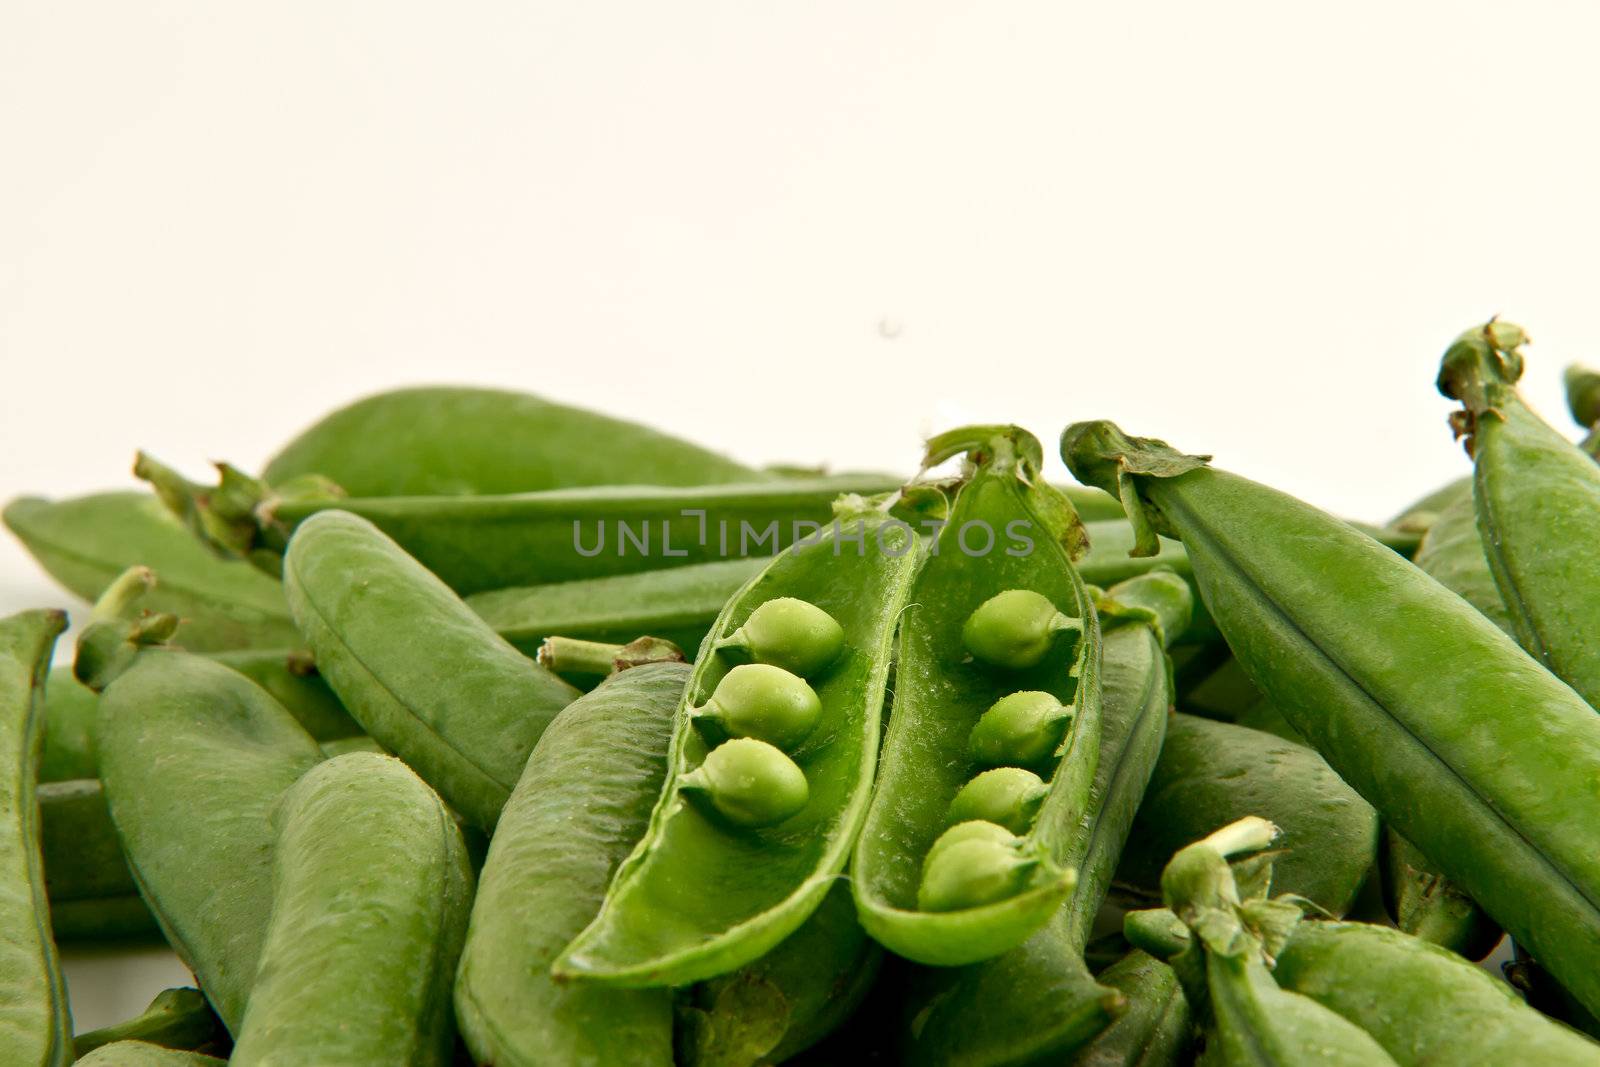 Bunch of peas by lavsen